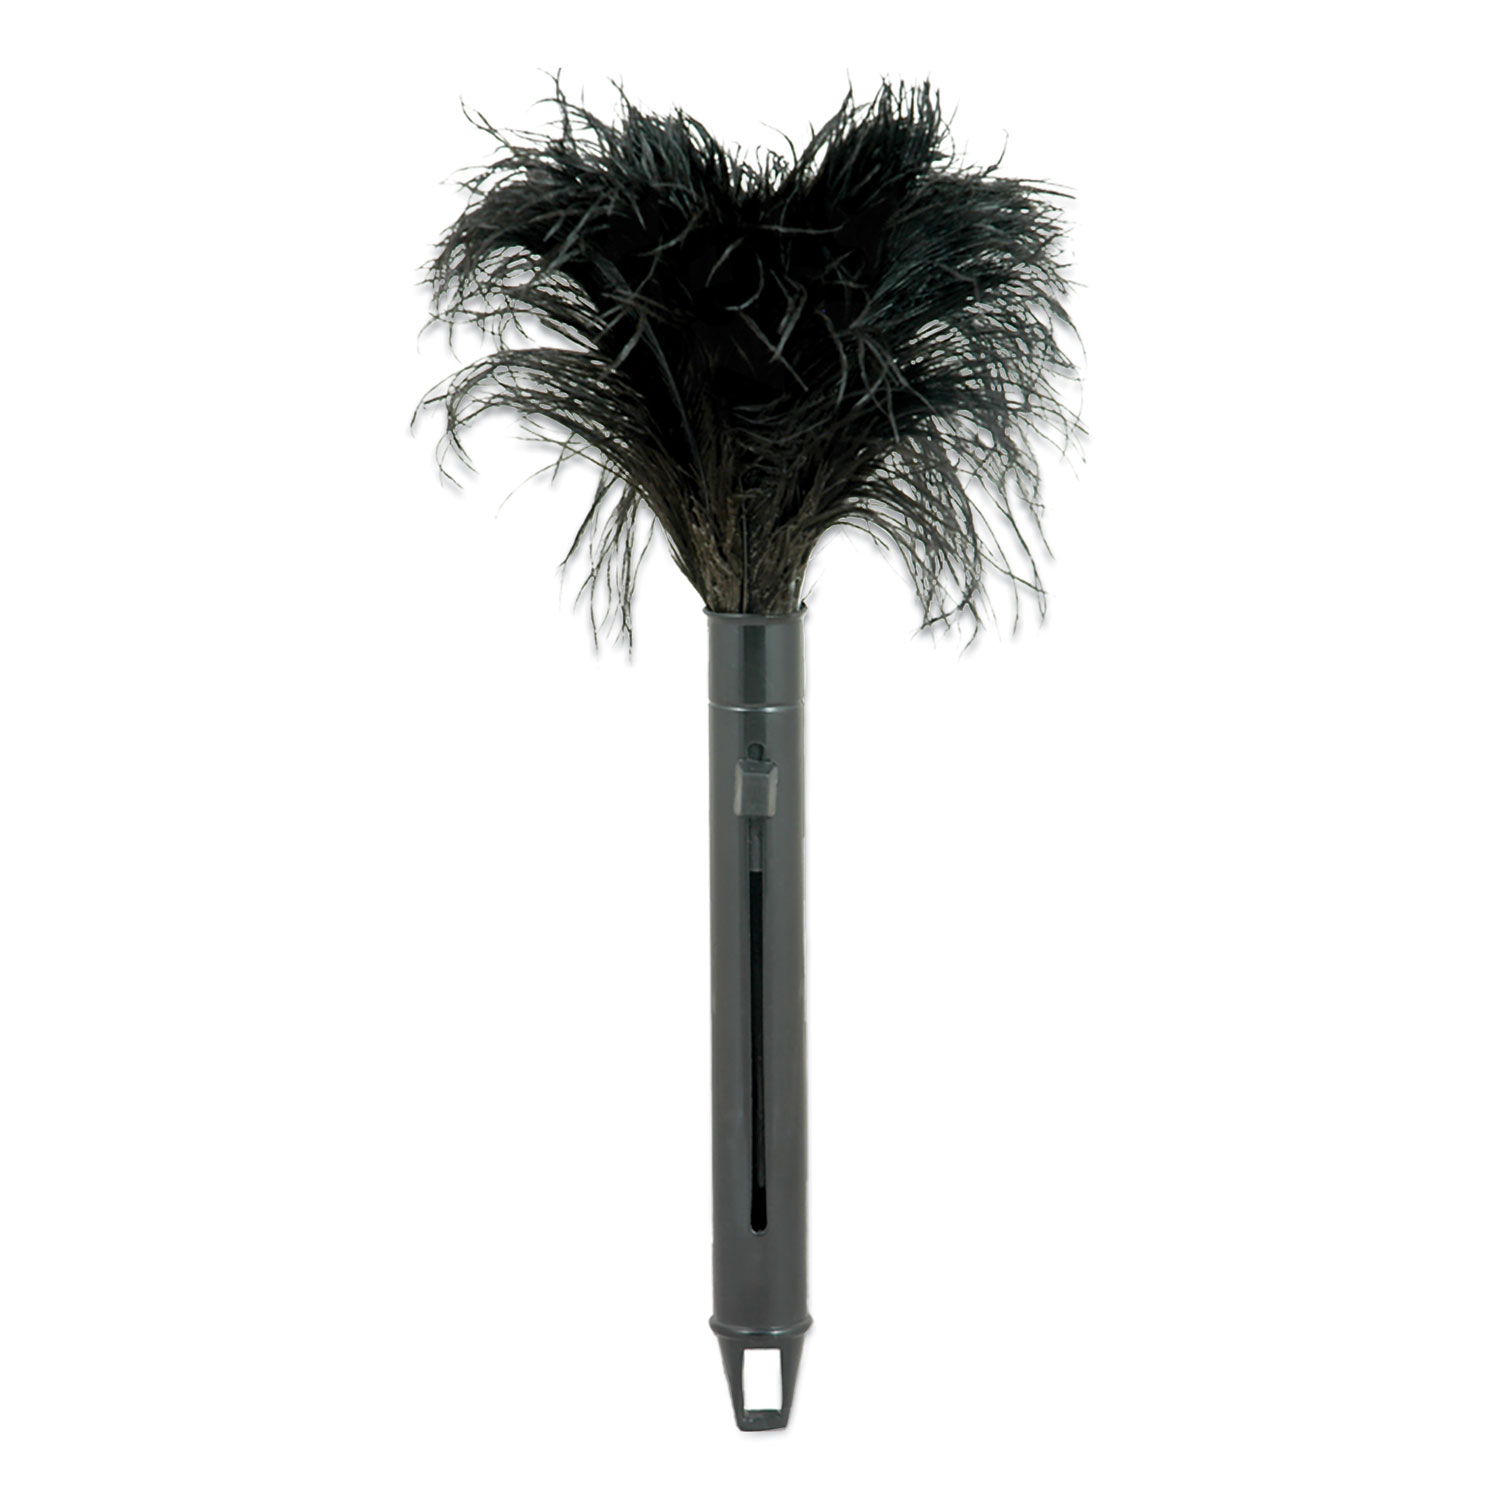 ODell® Pop Top Feather Duster, Ostrich, 9 to 14 Handle, Black